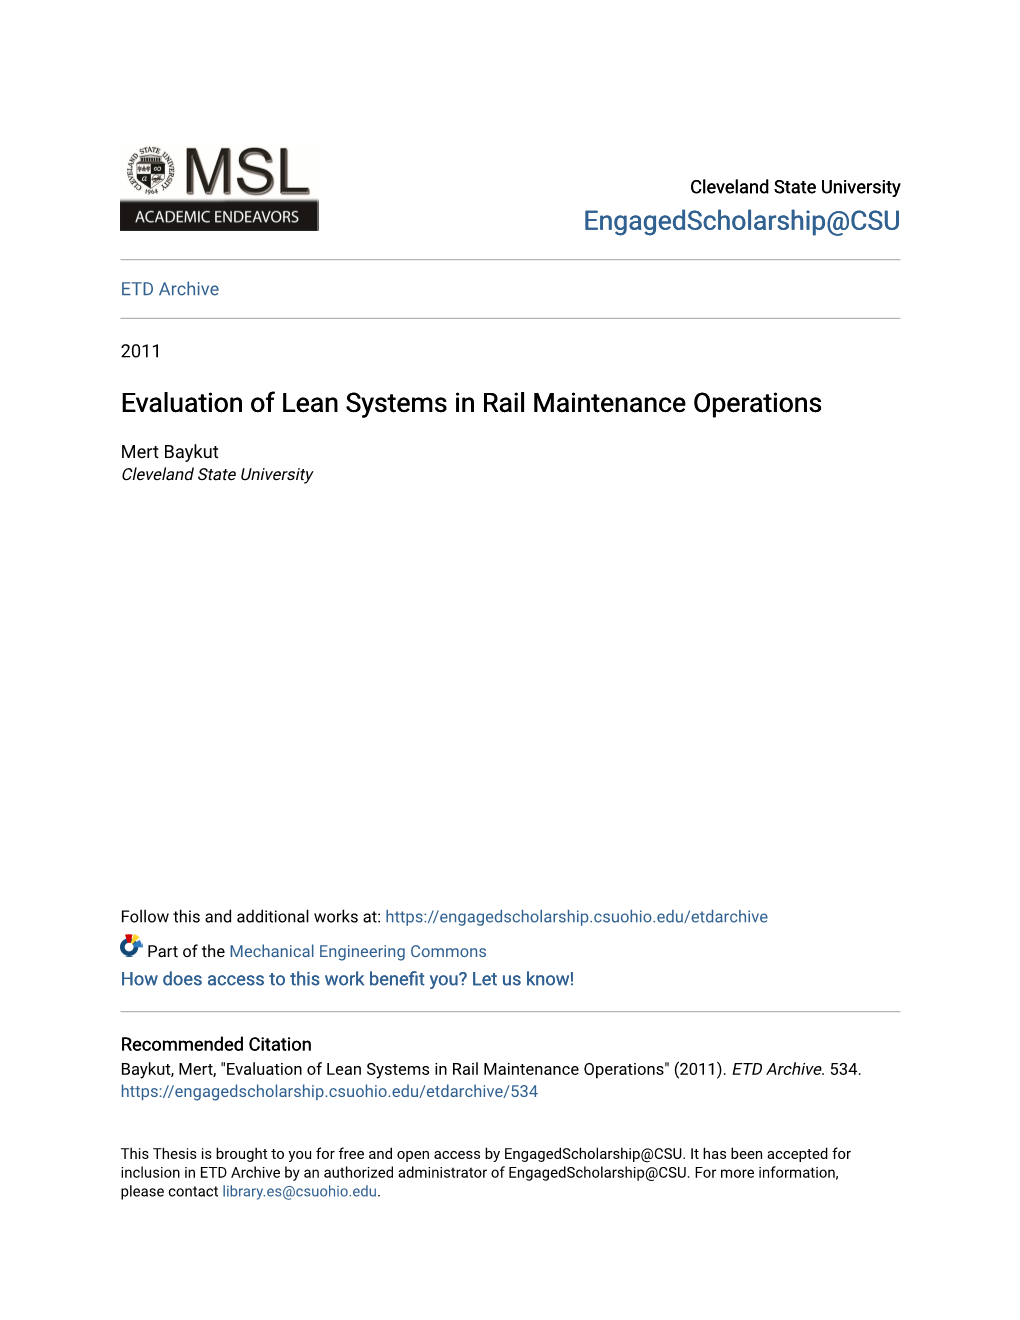 Evaluation of Lean Systems in Rail Maintenance Operations